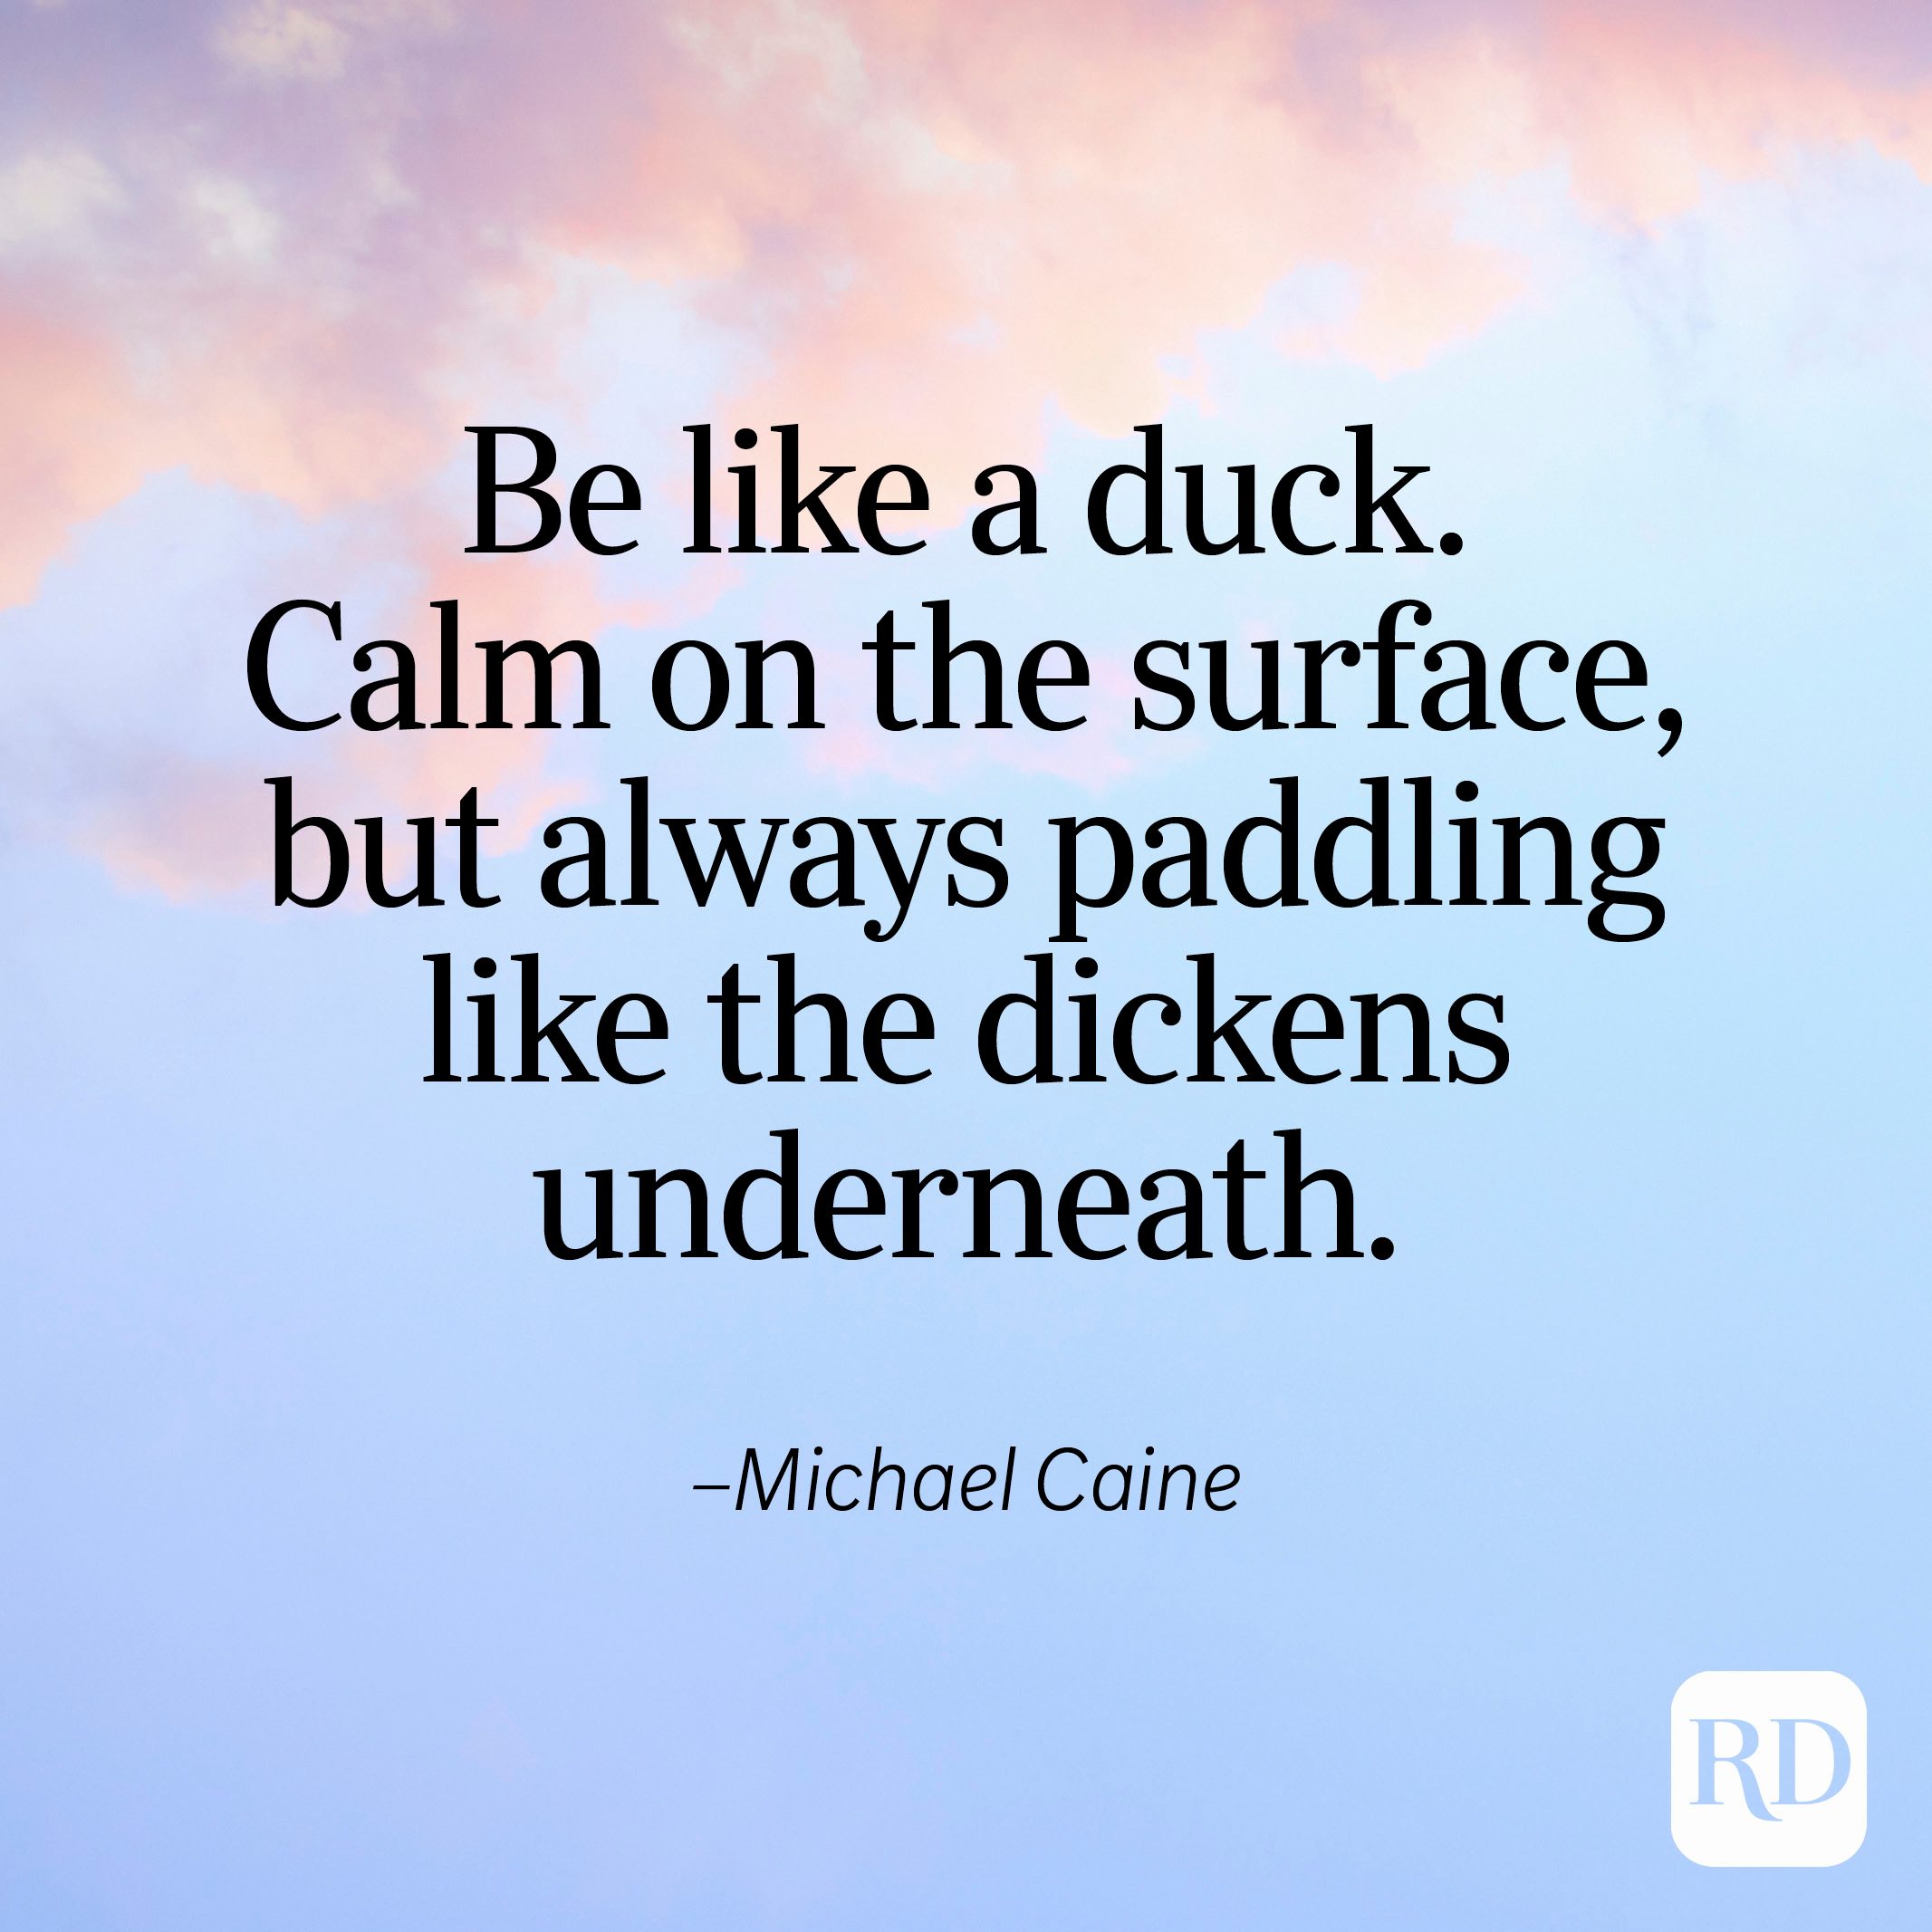 "Be like a duck. Calm on the surface, but always paddling like the dickens underneath." —Michael Caine